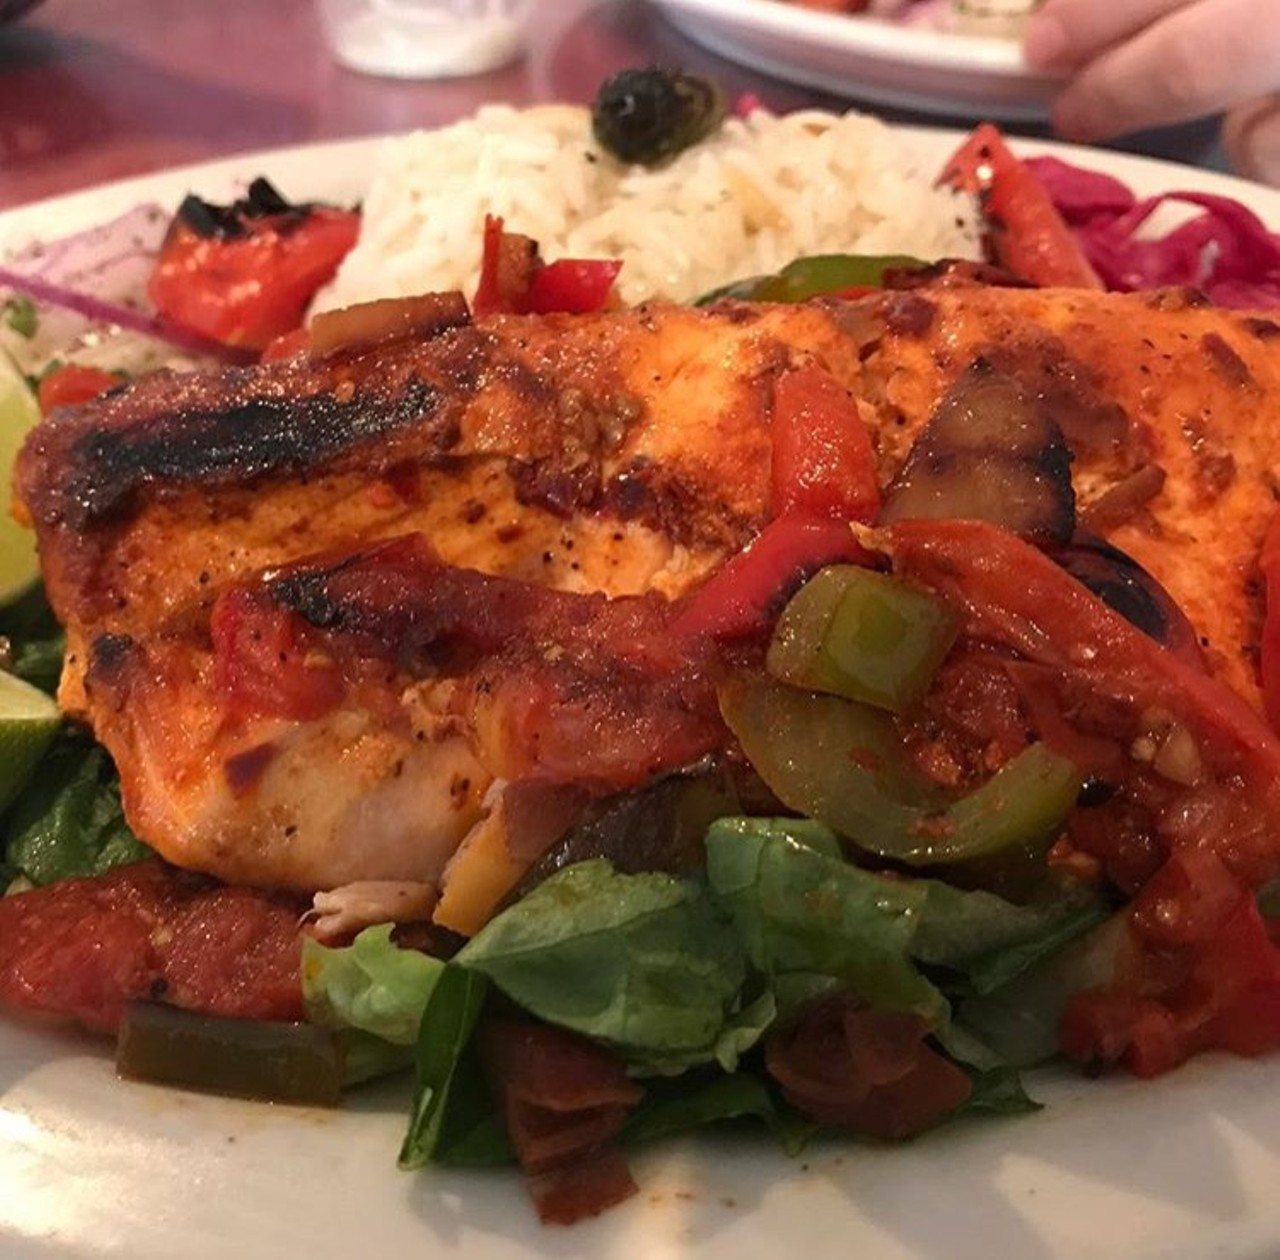 Mediterranean Turkish Grill
8507 McCullough Ave., Suite B13, (210) 399-1645, kmturkishgrill.com
For a limited time guests can choose between the lunch or dinner menu to receive up to 40% off on their meals.
Photo via Instagram / brizytorregrosa